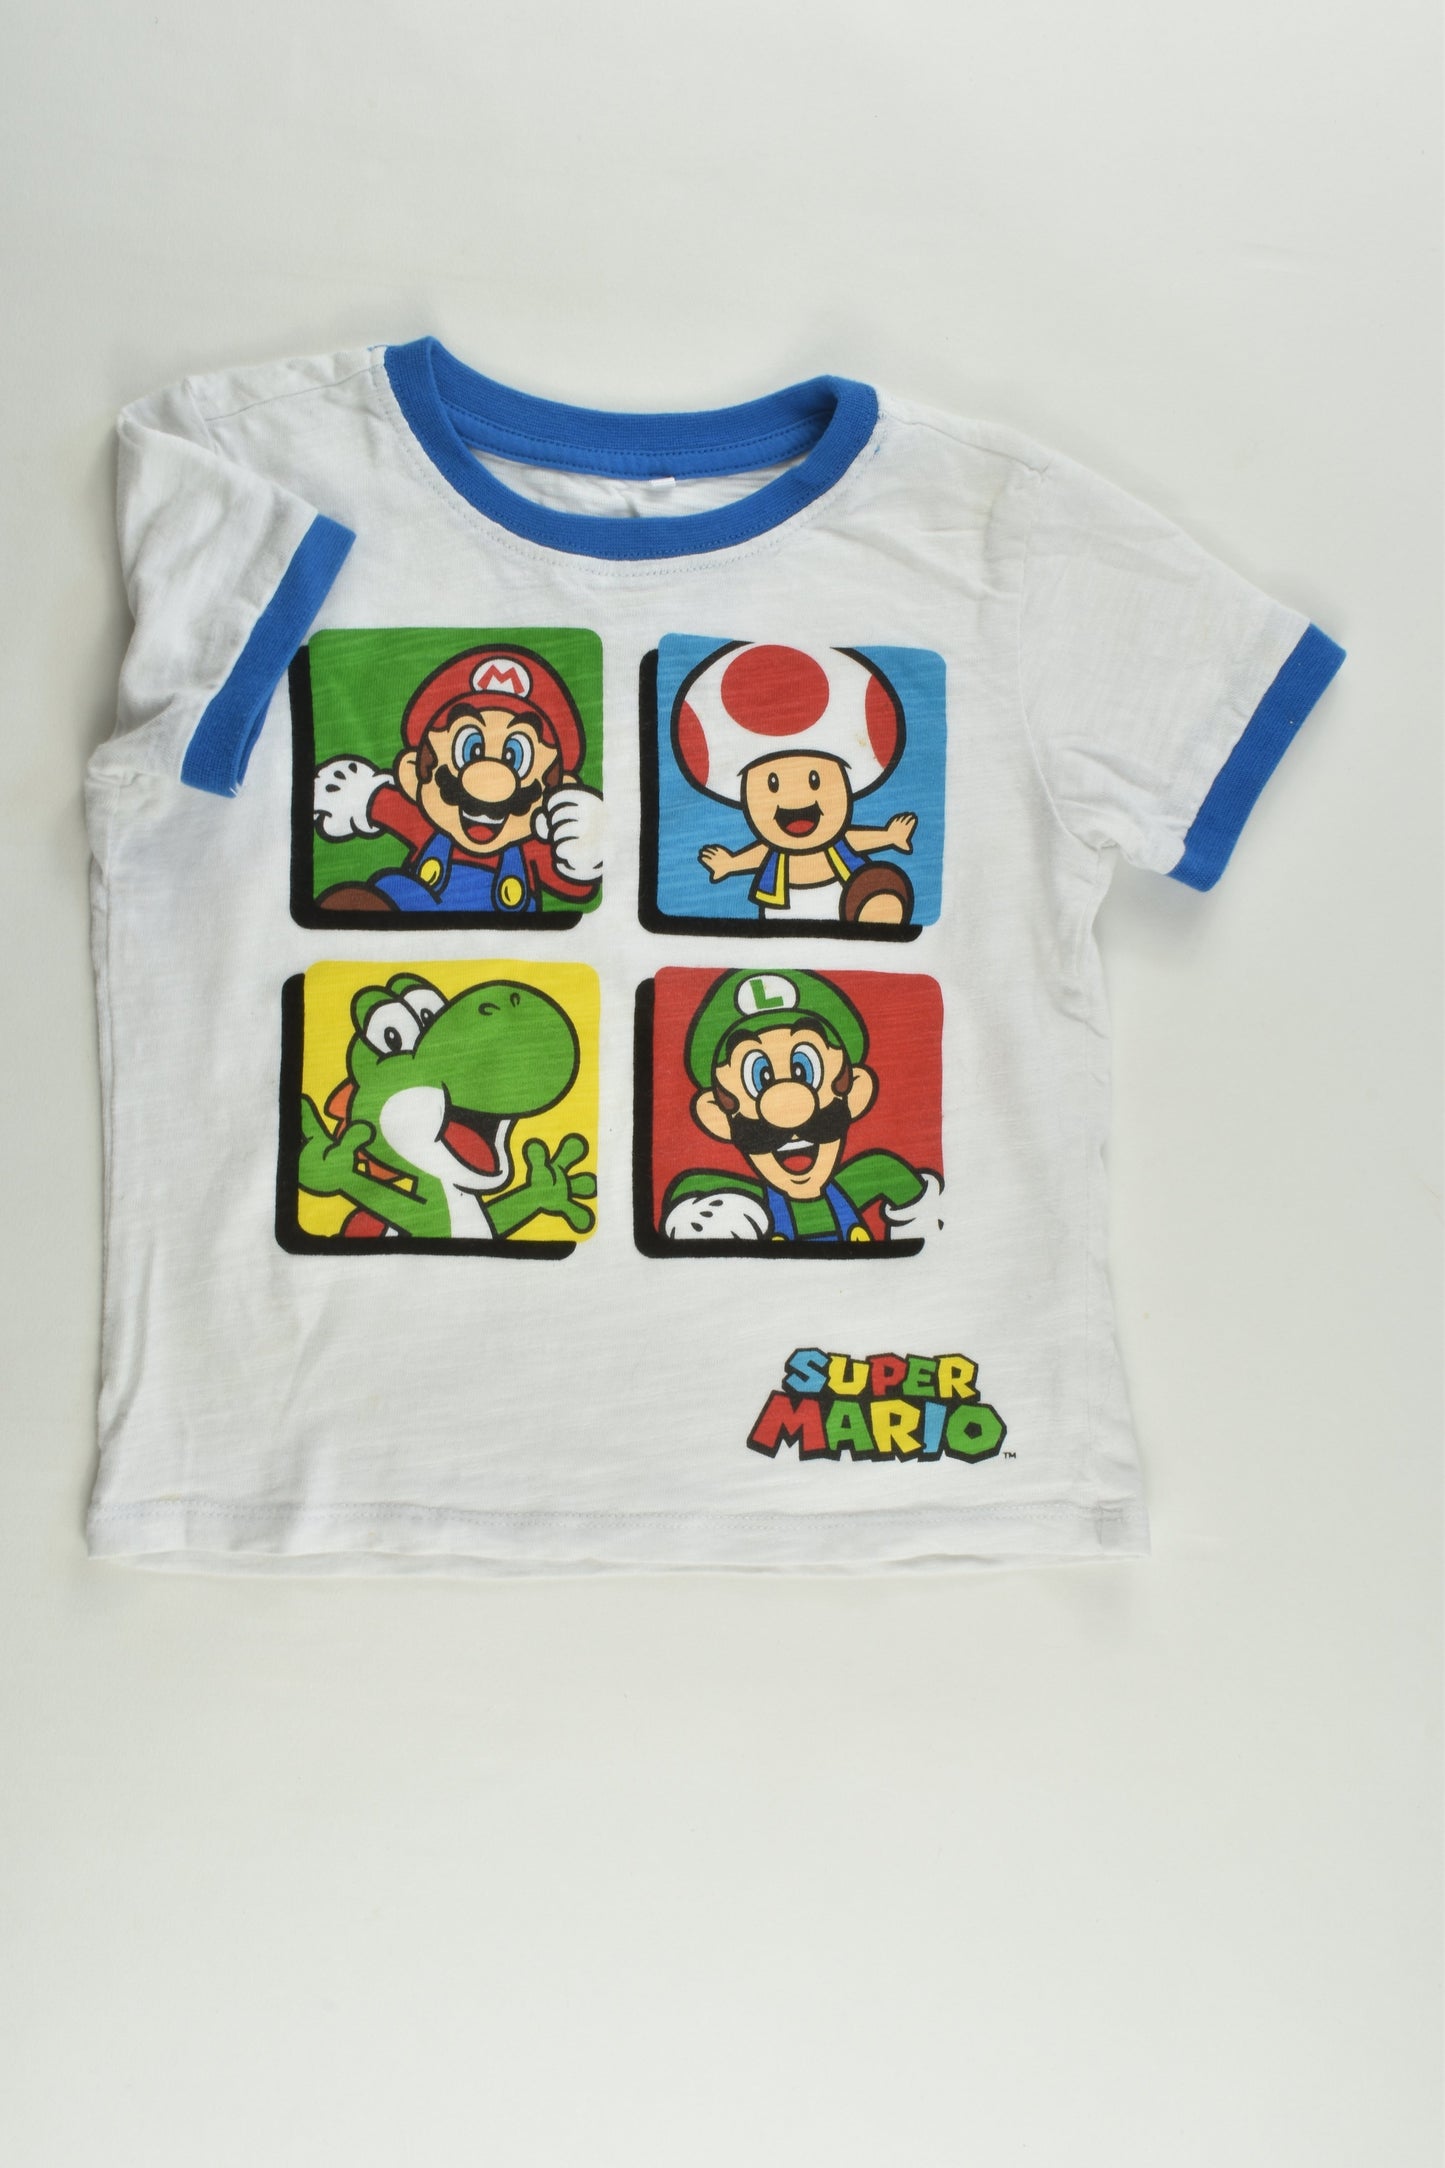 Super Mario Size 3 'Game On' T-shirt